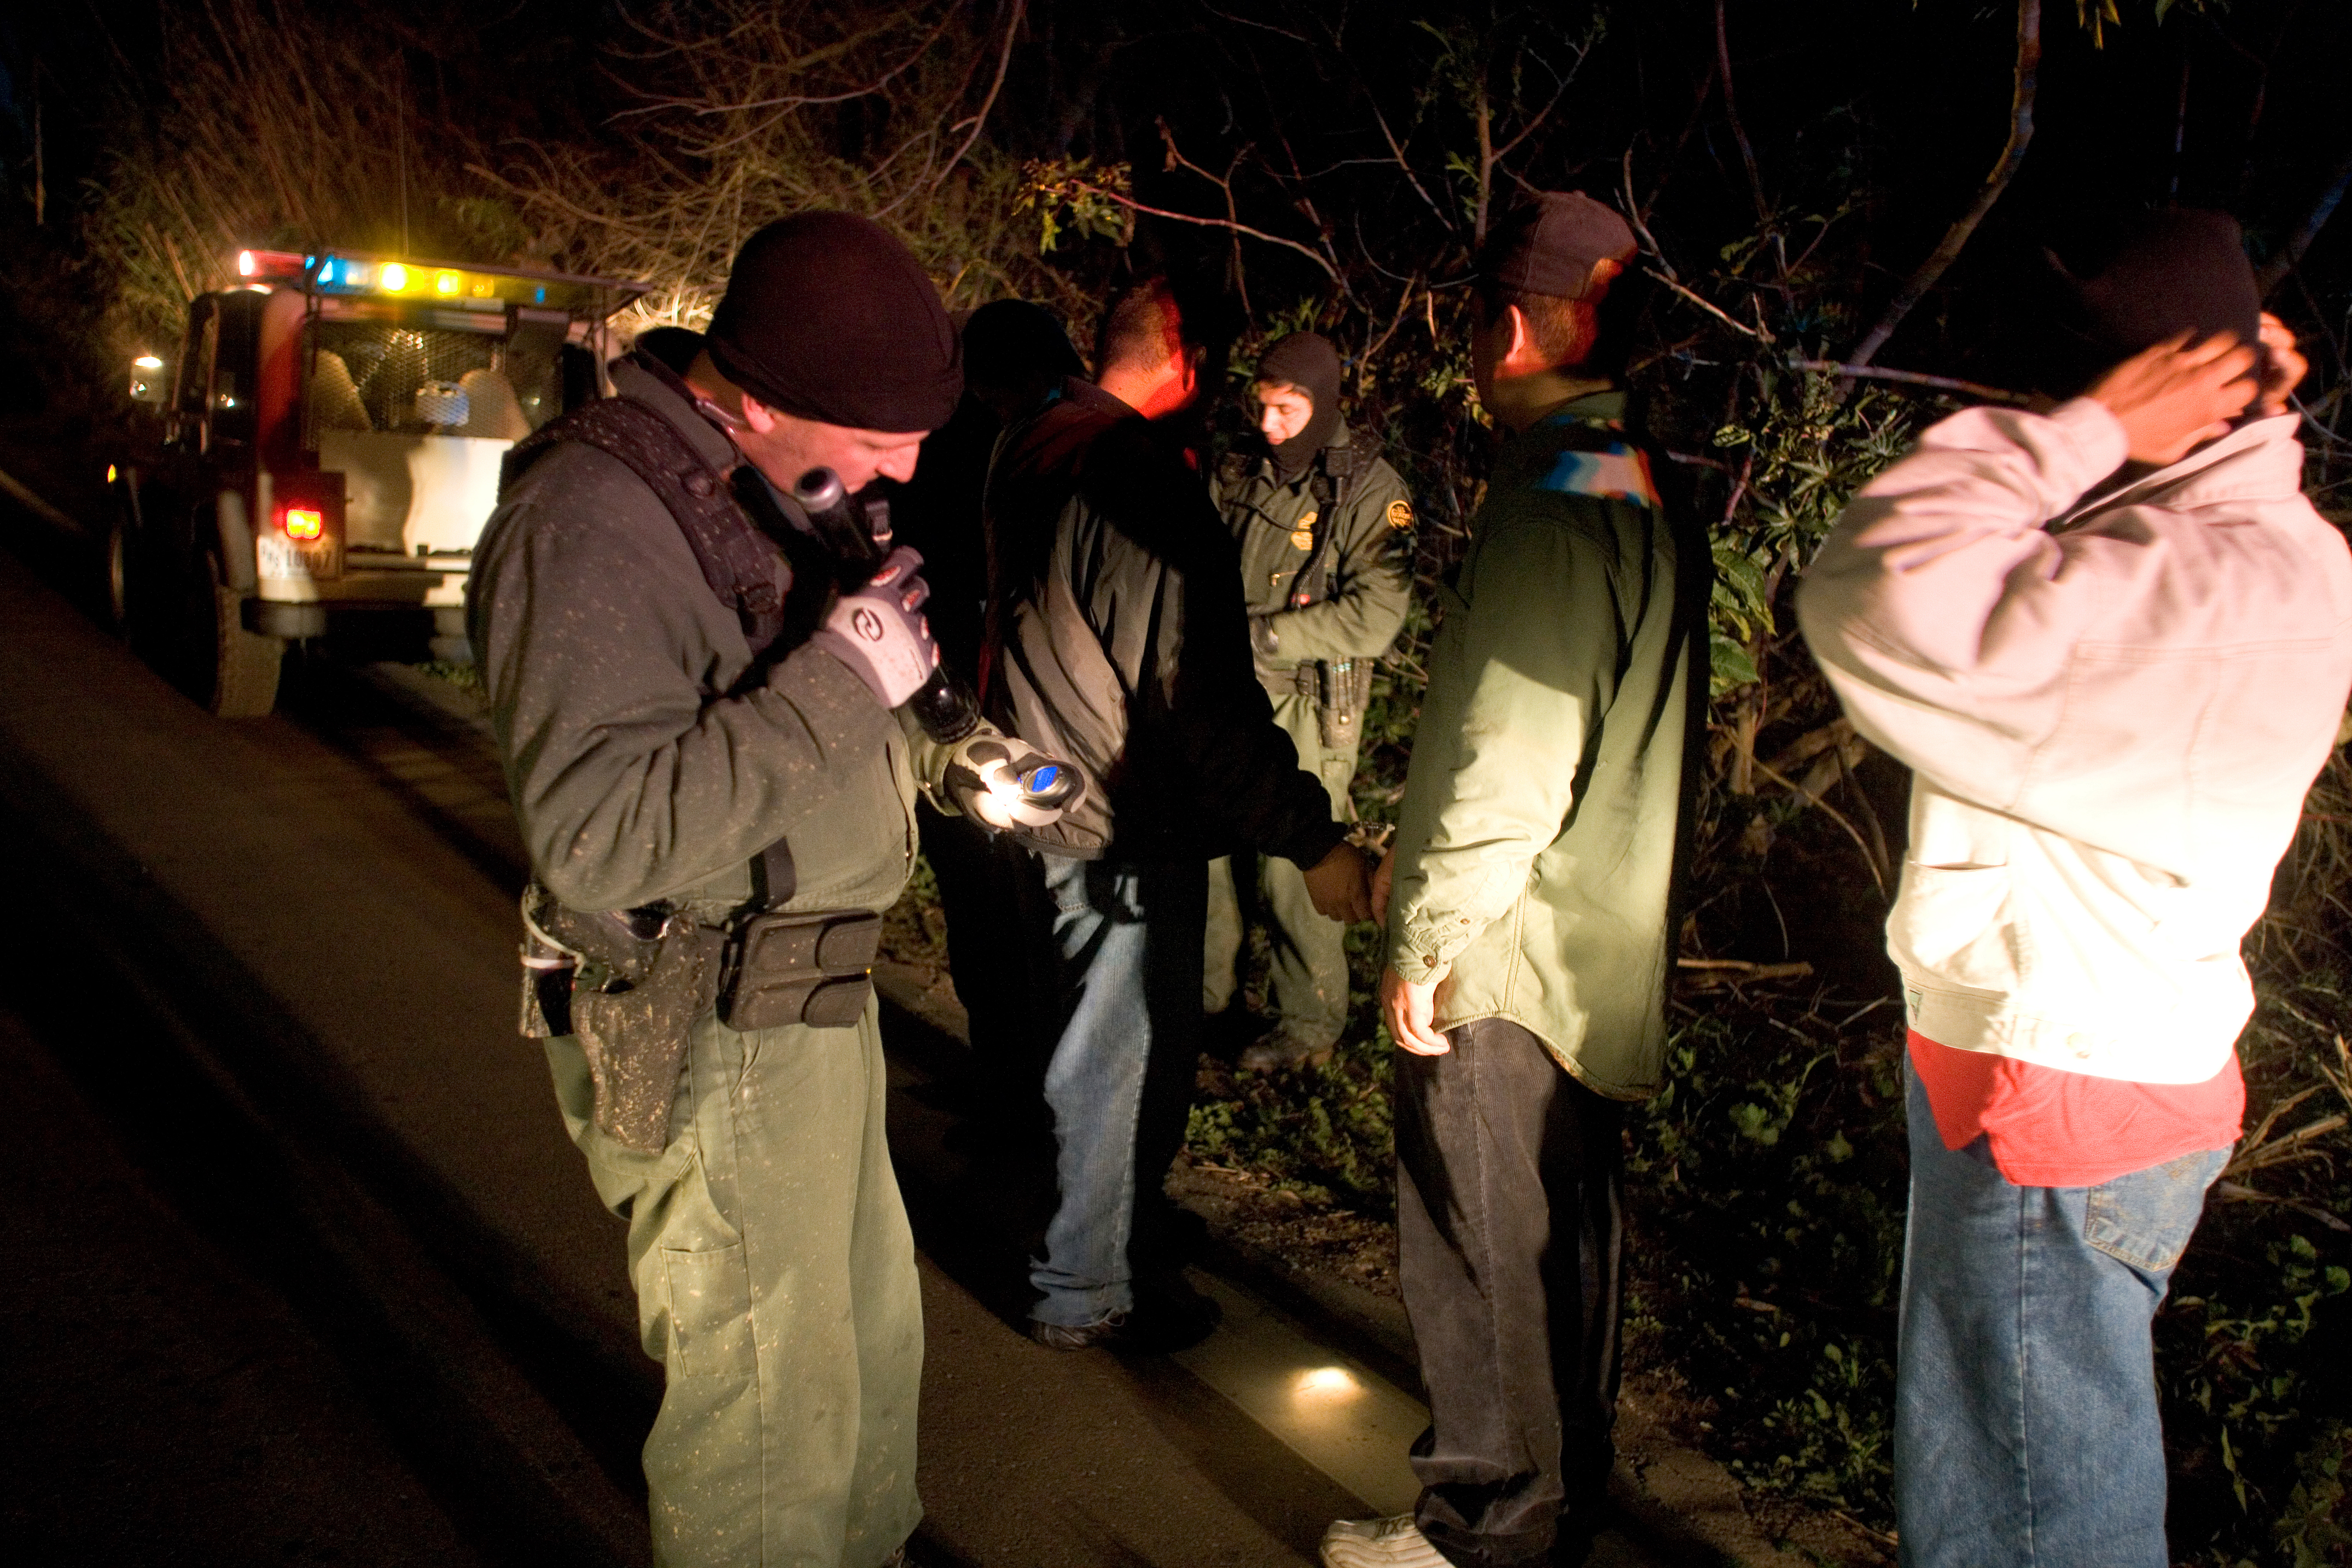 Border Patrol agents conduct pat downs of migrants caught crossing the border illegally in the Imperial Valley Sector.